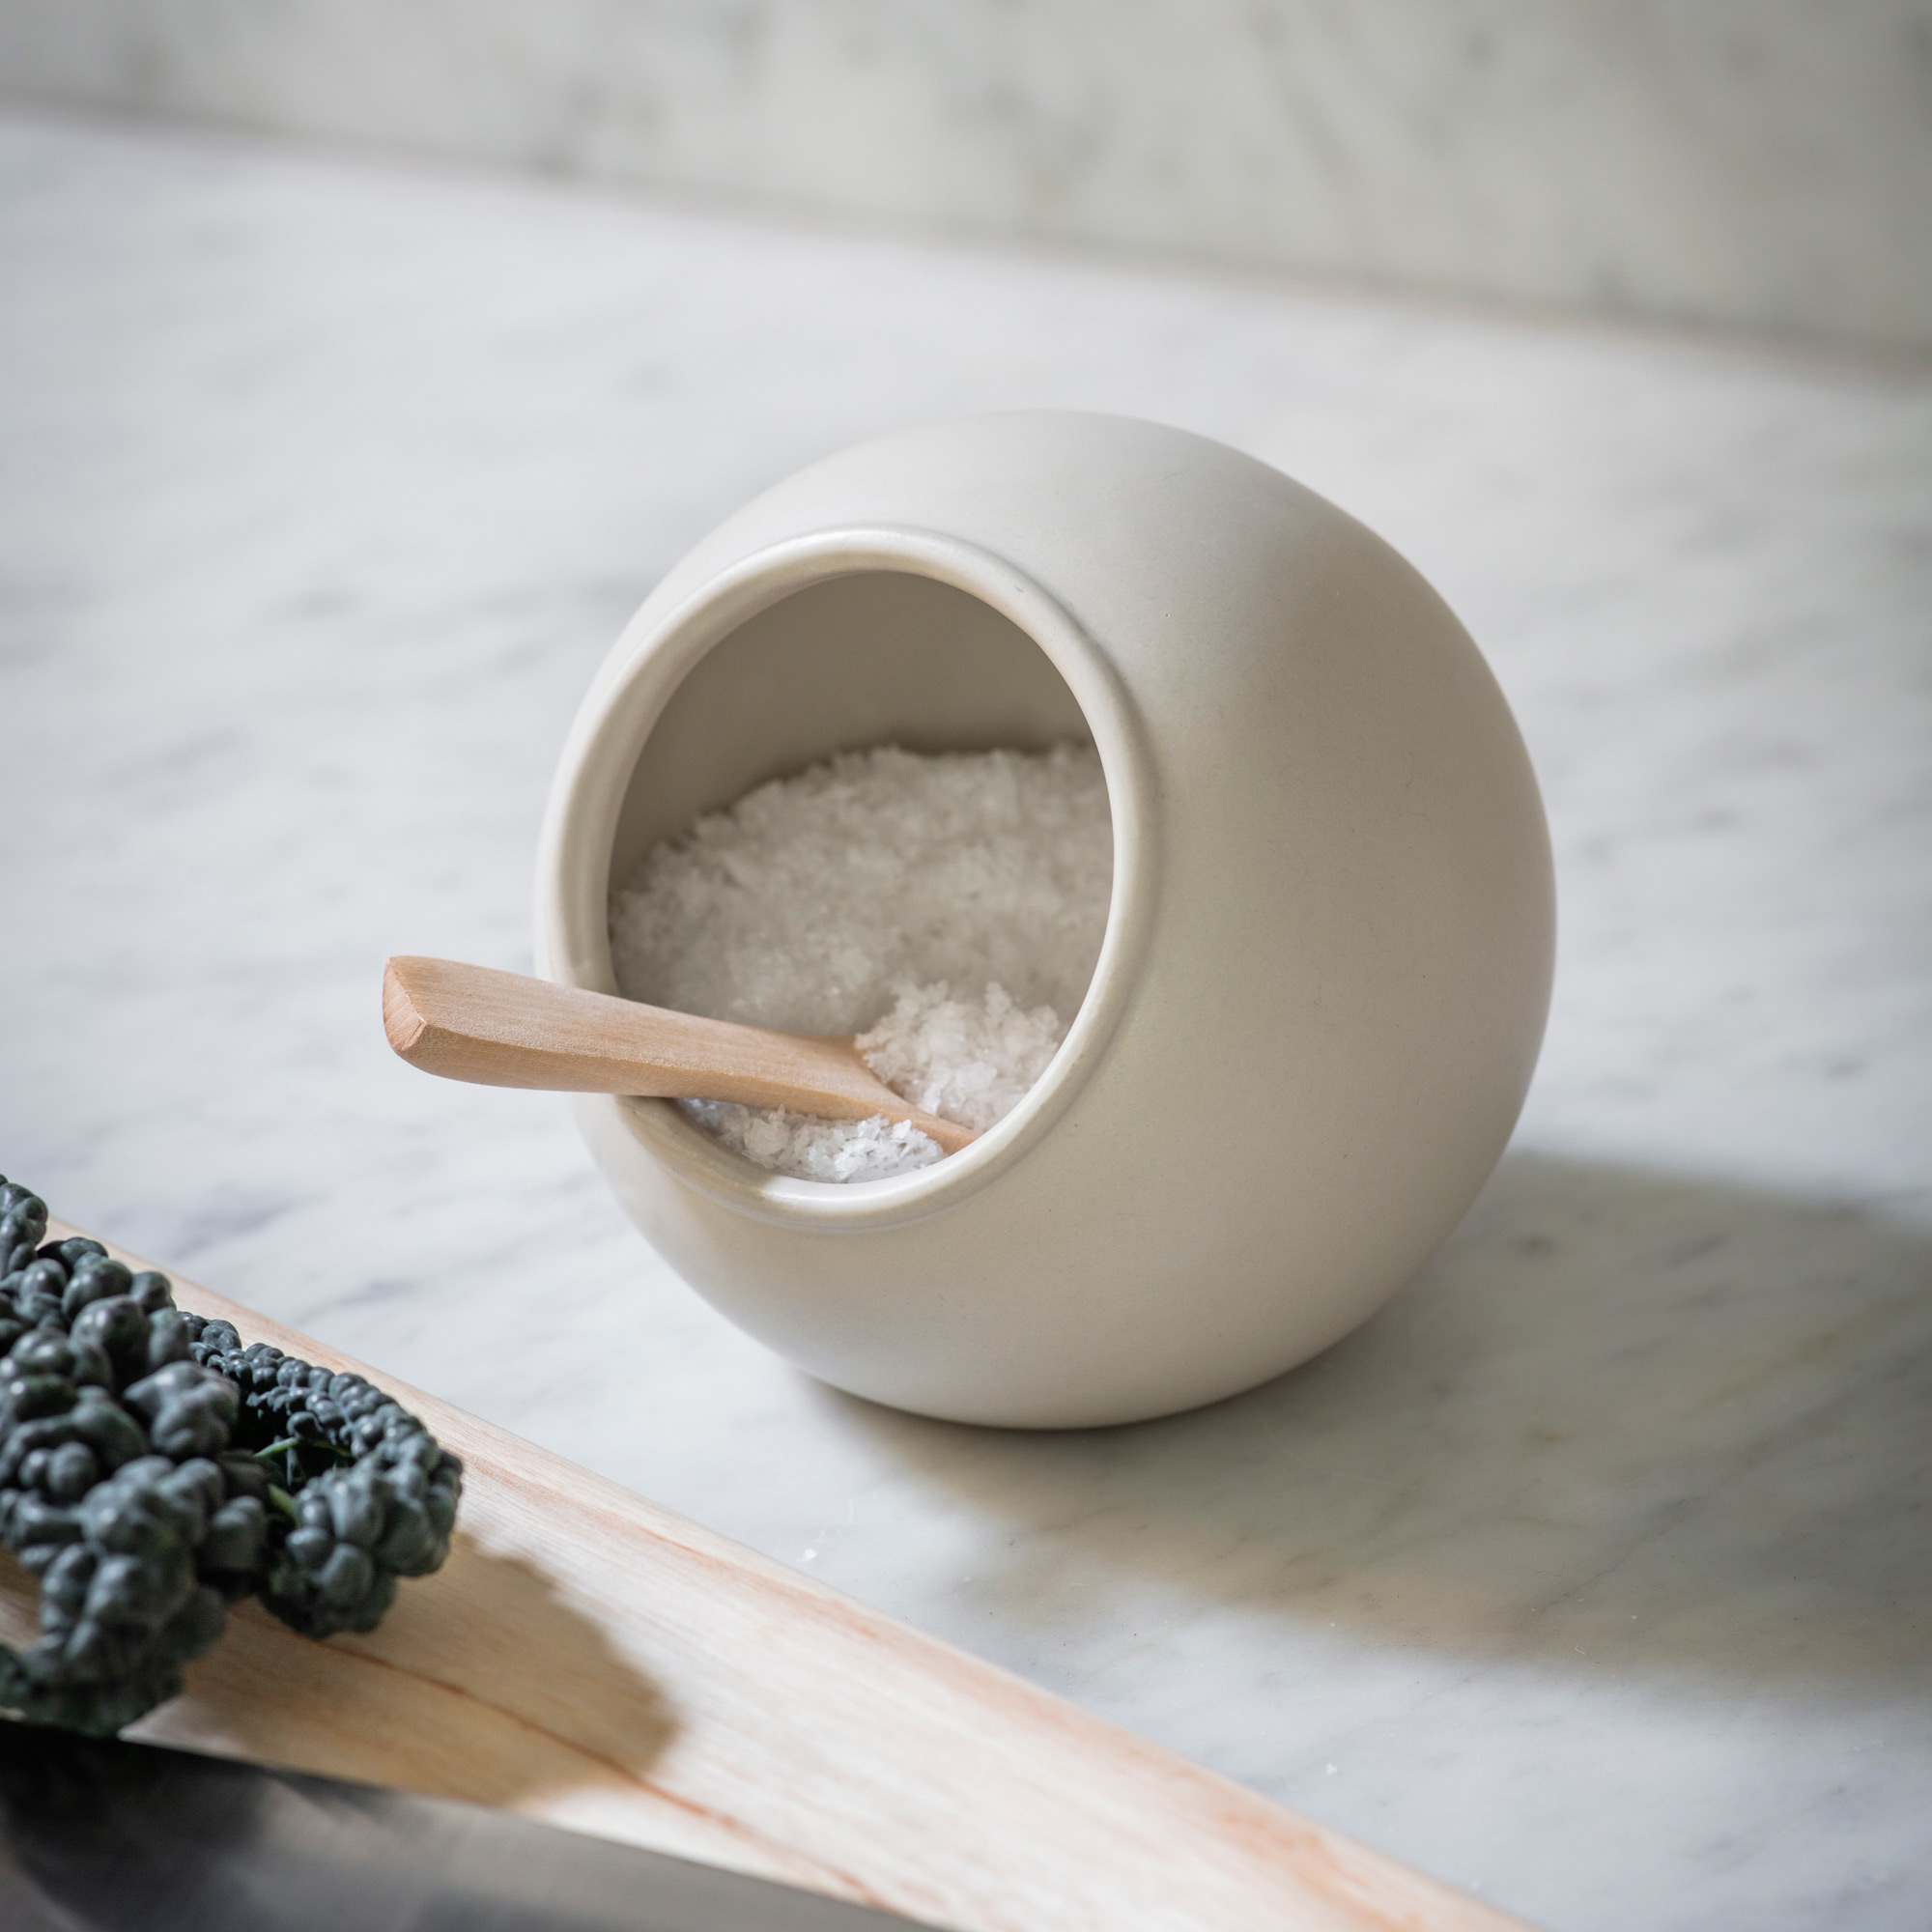 Read more about Graham and green ceramic salt cellar